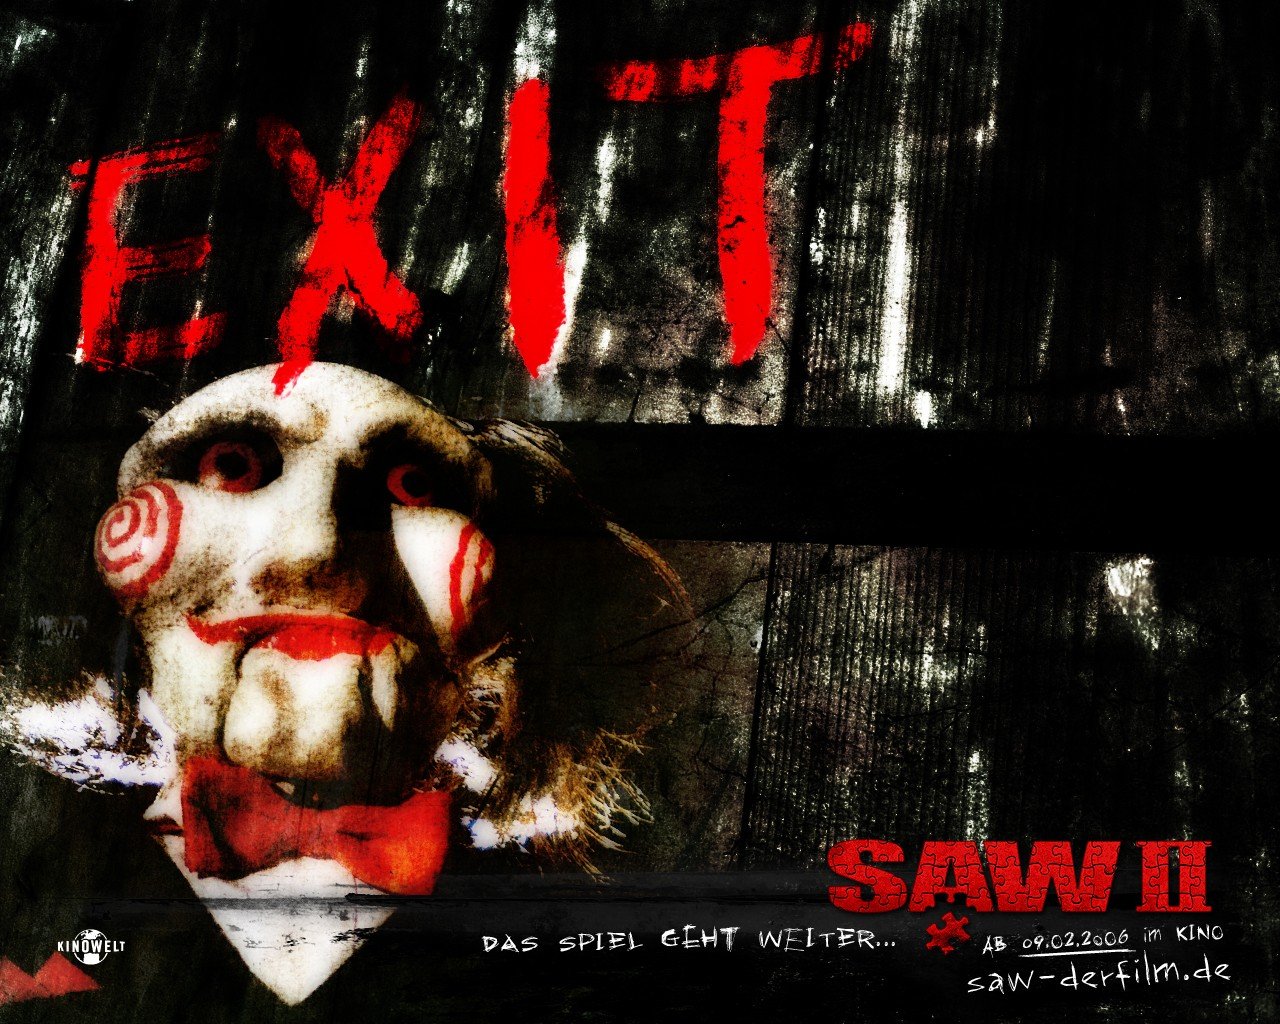 Free download 2 Saw II 2005 FreeMovieWallpaperru [1280x1024] for your Desktop, Mobile & Tablet. Explore Saw Movie Wallpaper. Black Gold Saw Wallpaper, Stihl Wallpaper Background in HD, Saw Wallpaper Jigsaw